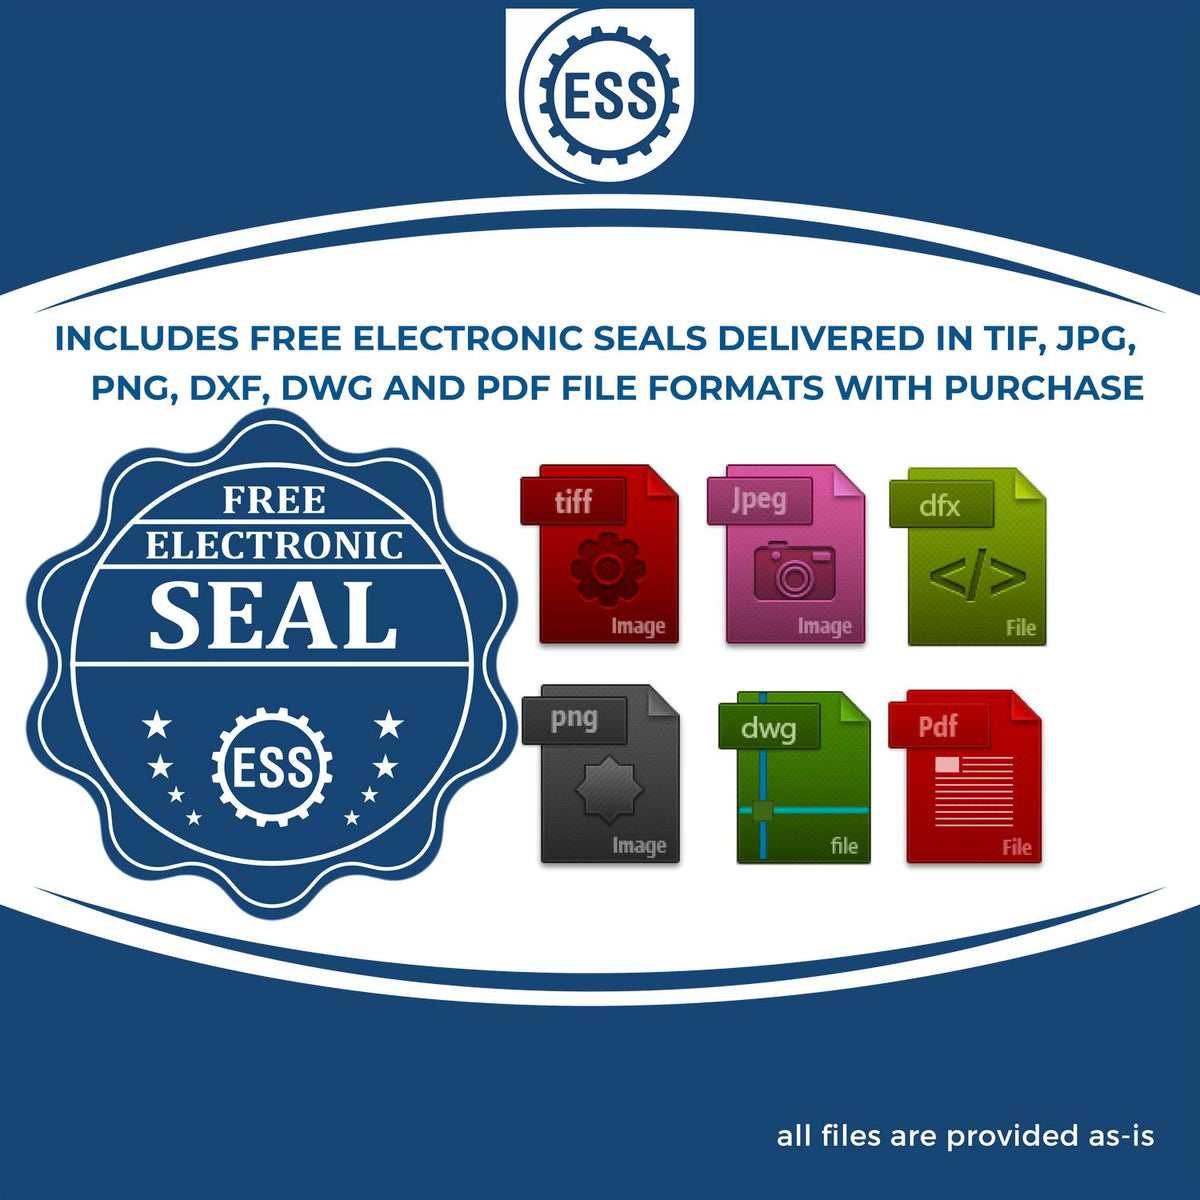 An infographic for the free electronic seal for the Self-Inking Rectangular Maryland Notary Stamp illustrating the different file type icons such as DXF, DWG, TIF, JPG and PNG.